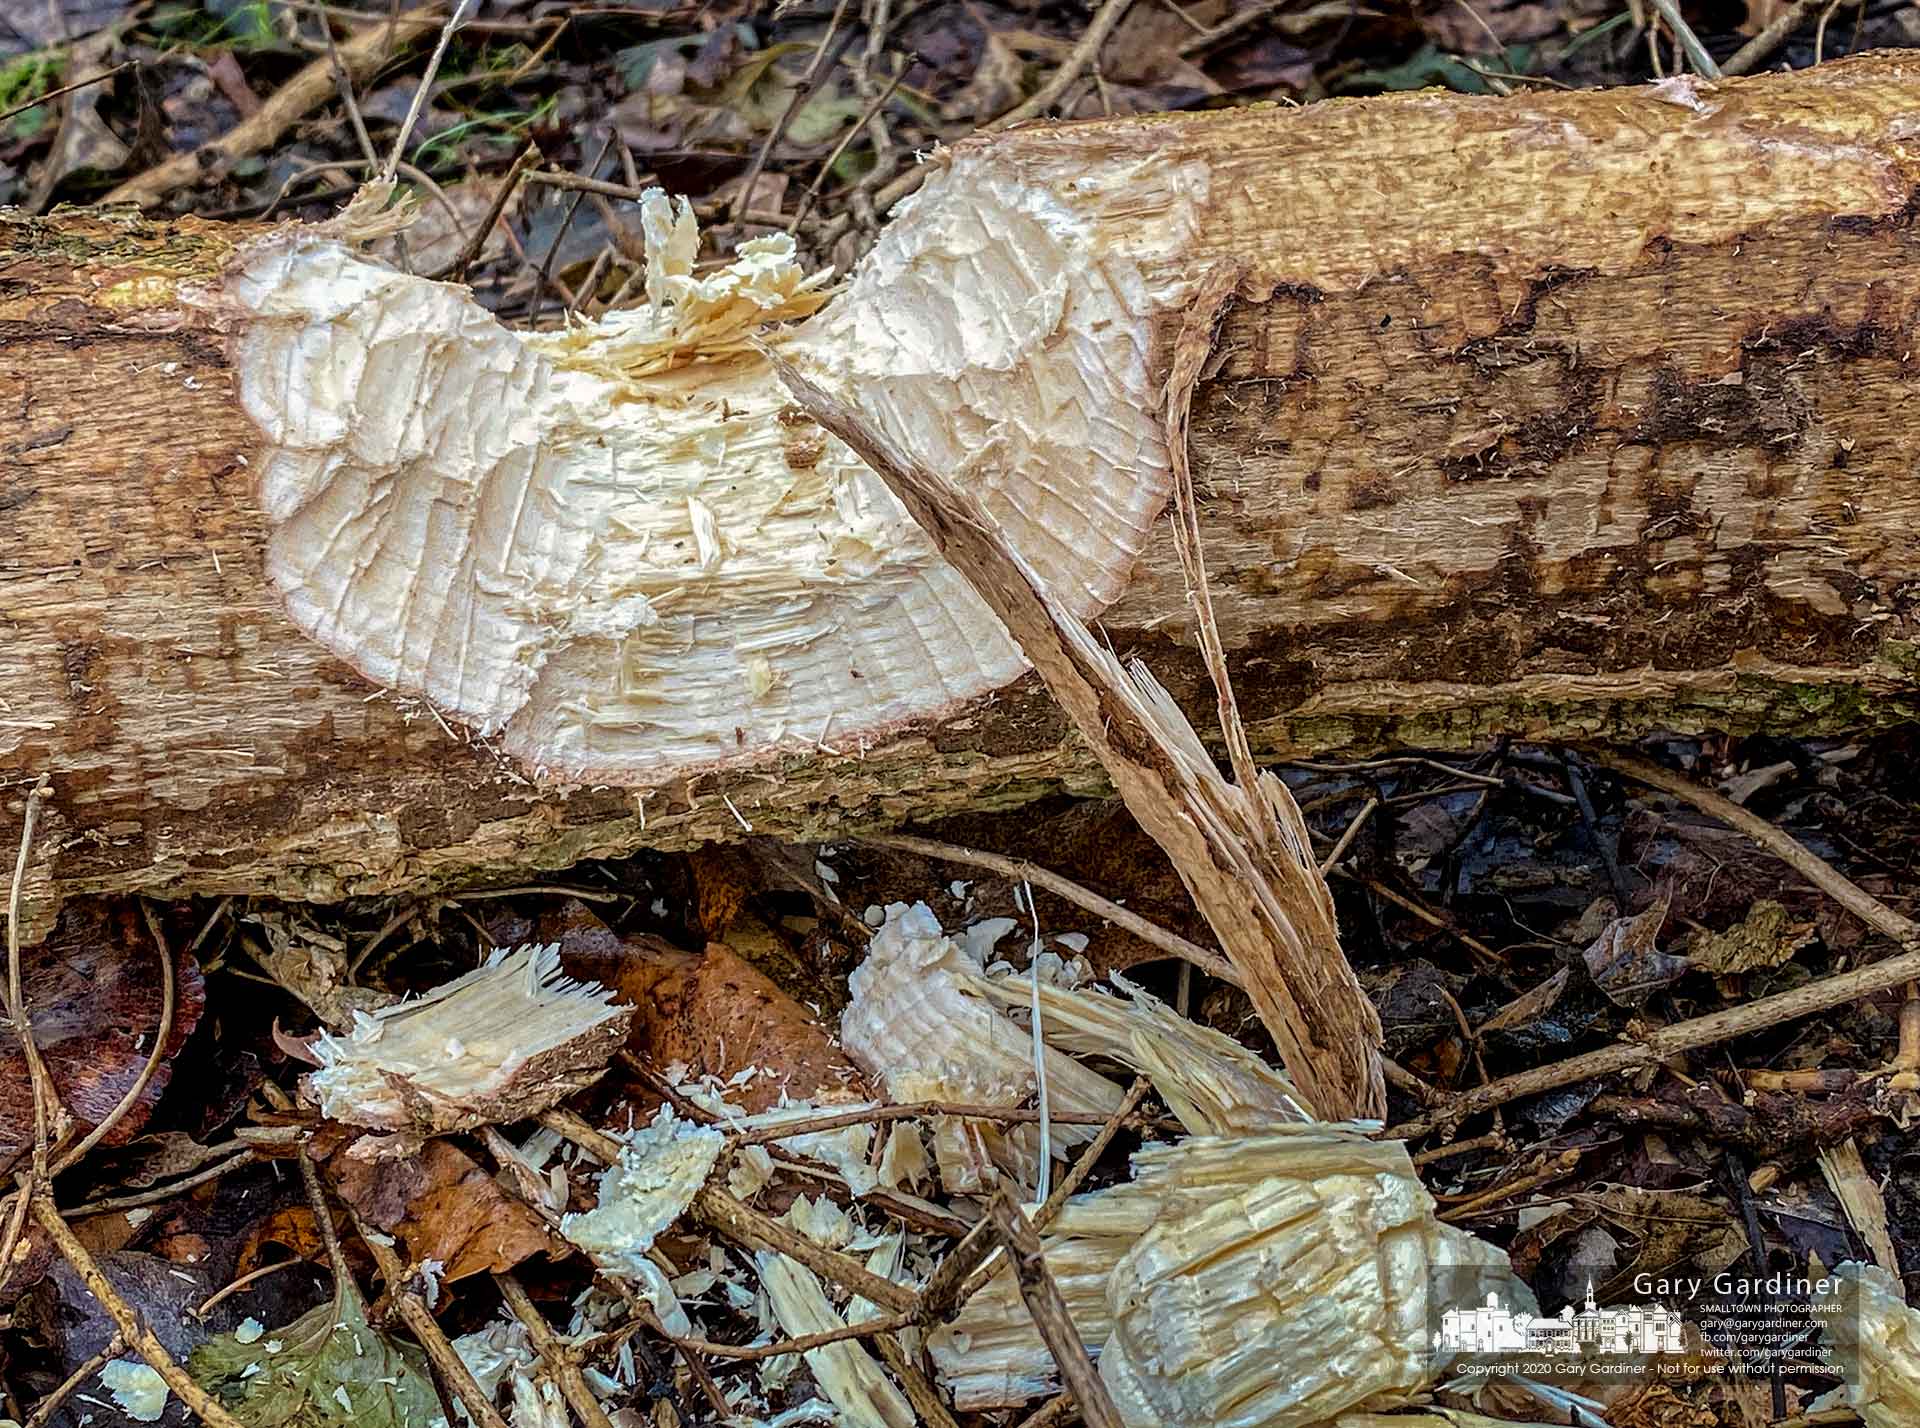 Chips from a beaver's overnight logging trip to the shoreline at Alum Creek Park litter the ground beside an unfinished sectioning of a tree it felled. My Final Photo for Feb. 1, 2020.